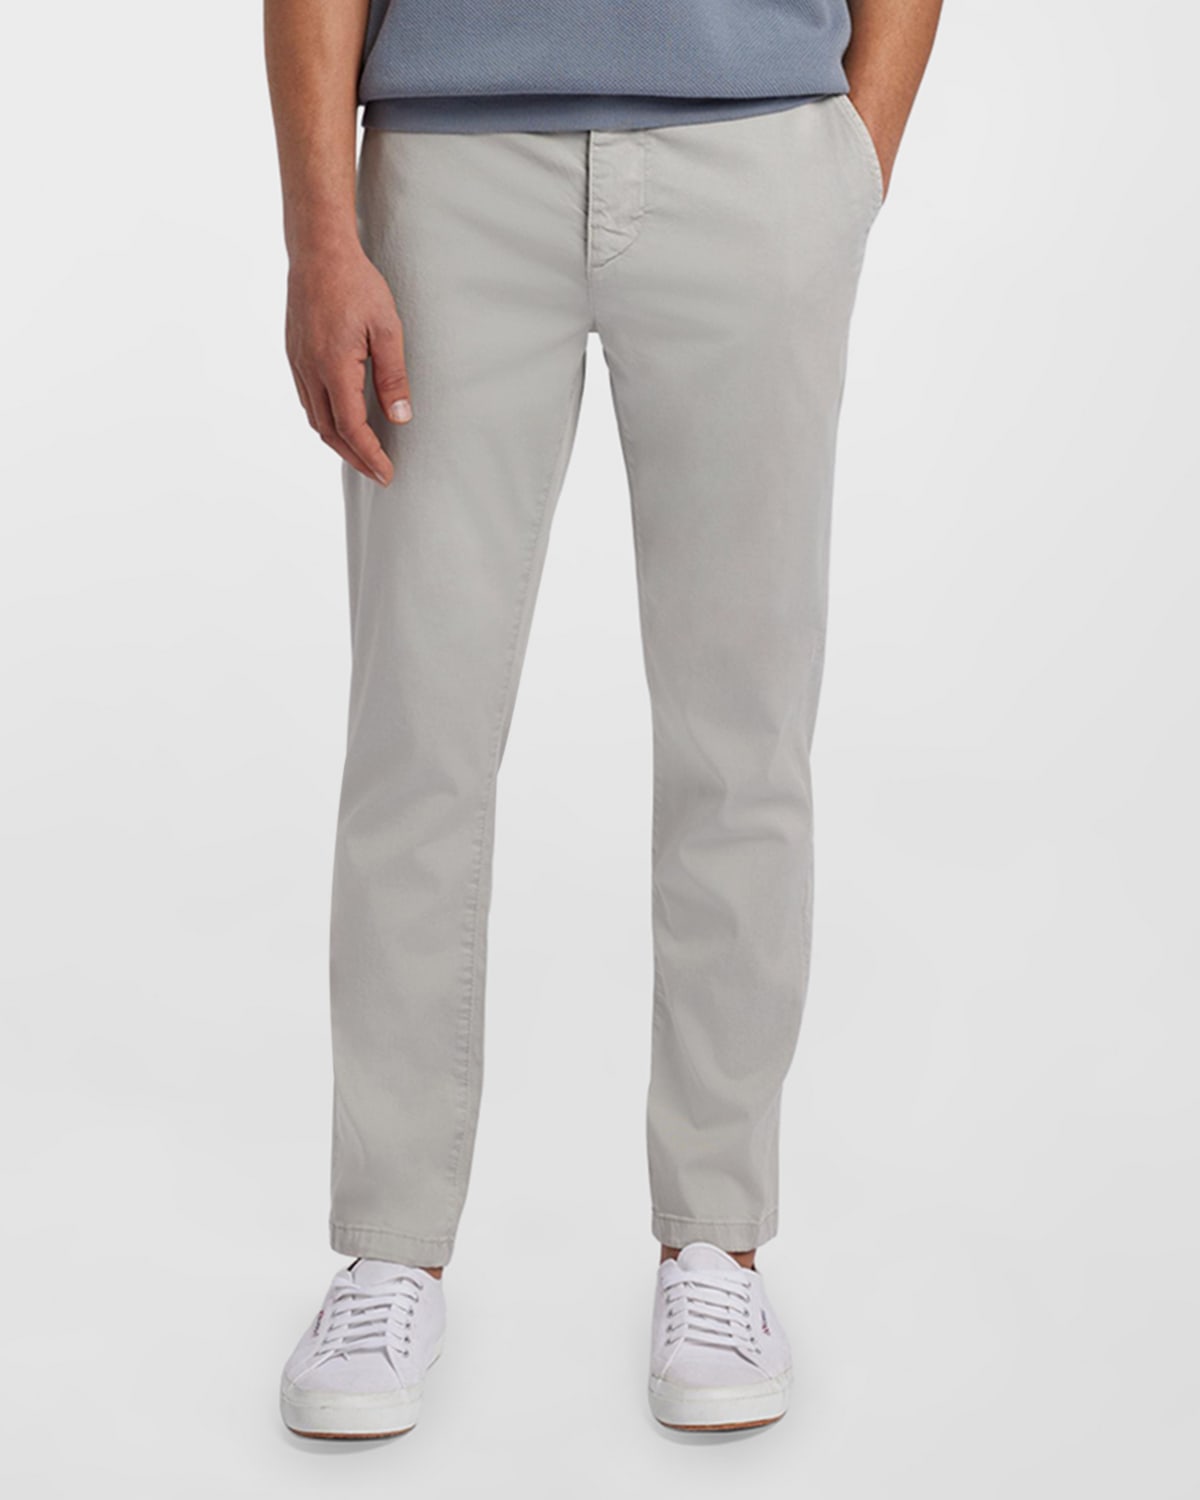 Shop 7 For All Mankind Men's Adrien Slim Chino Pants In Gentle Grey